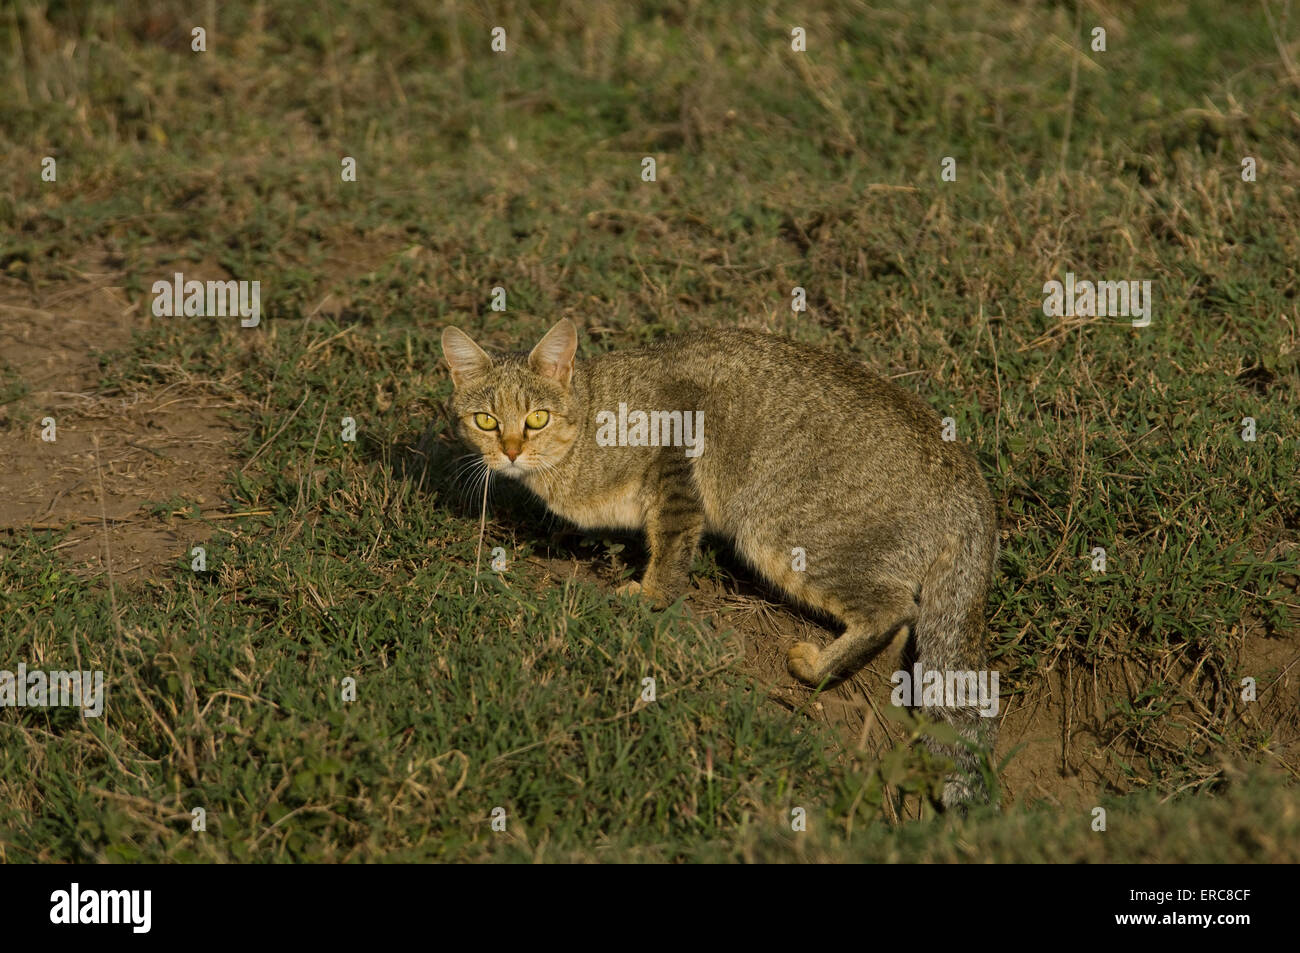 AFRICAN WILD CAT STOPPED IN HIS TRACKS LOOKING AT CAMERA Stock Photo